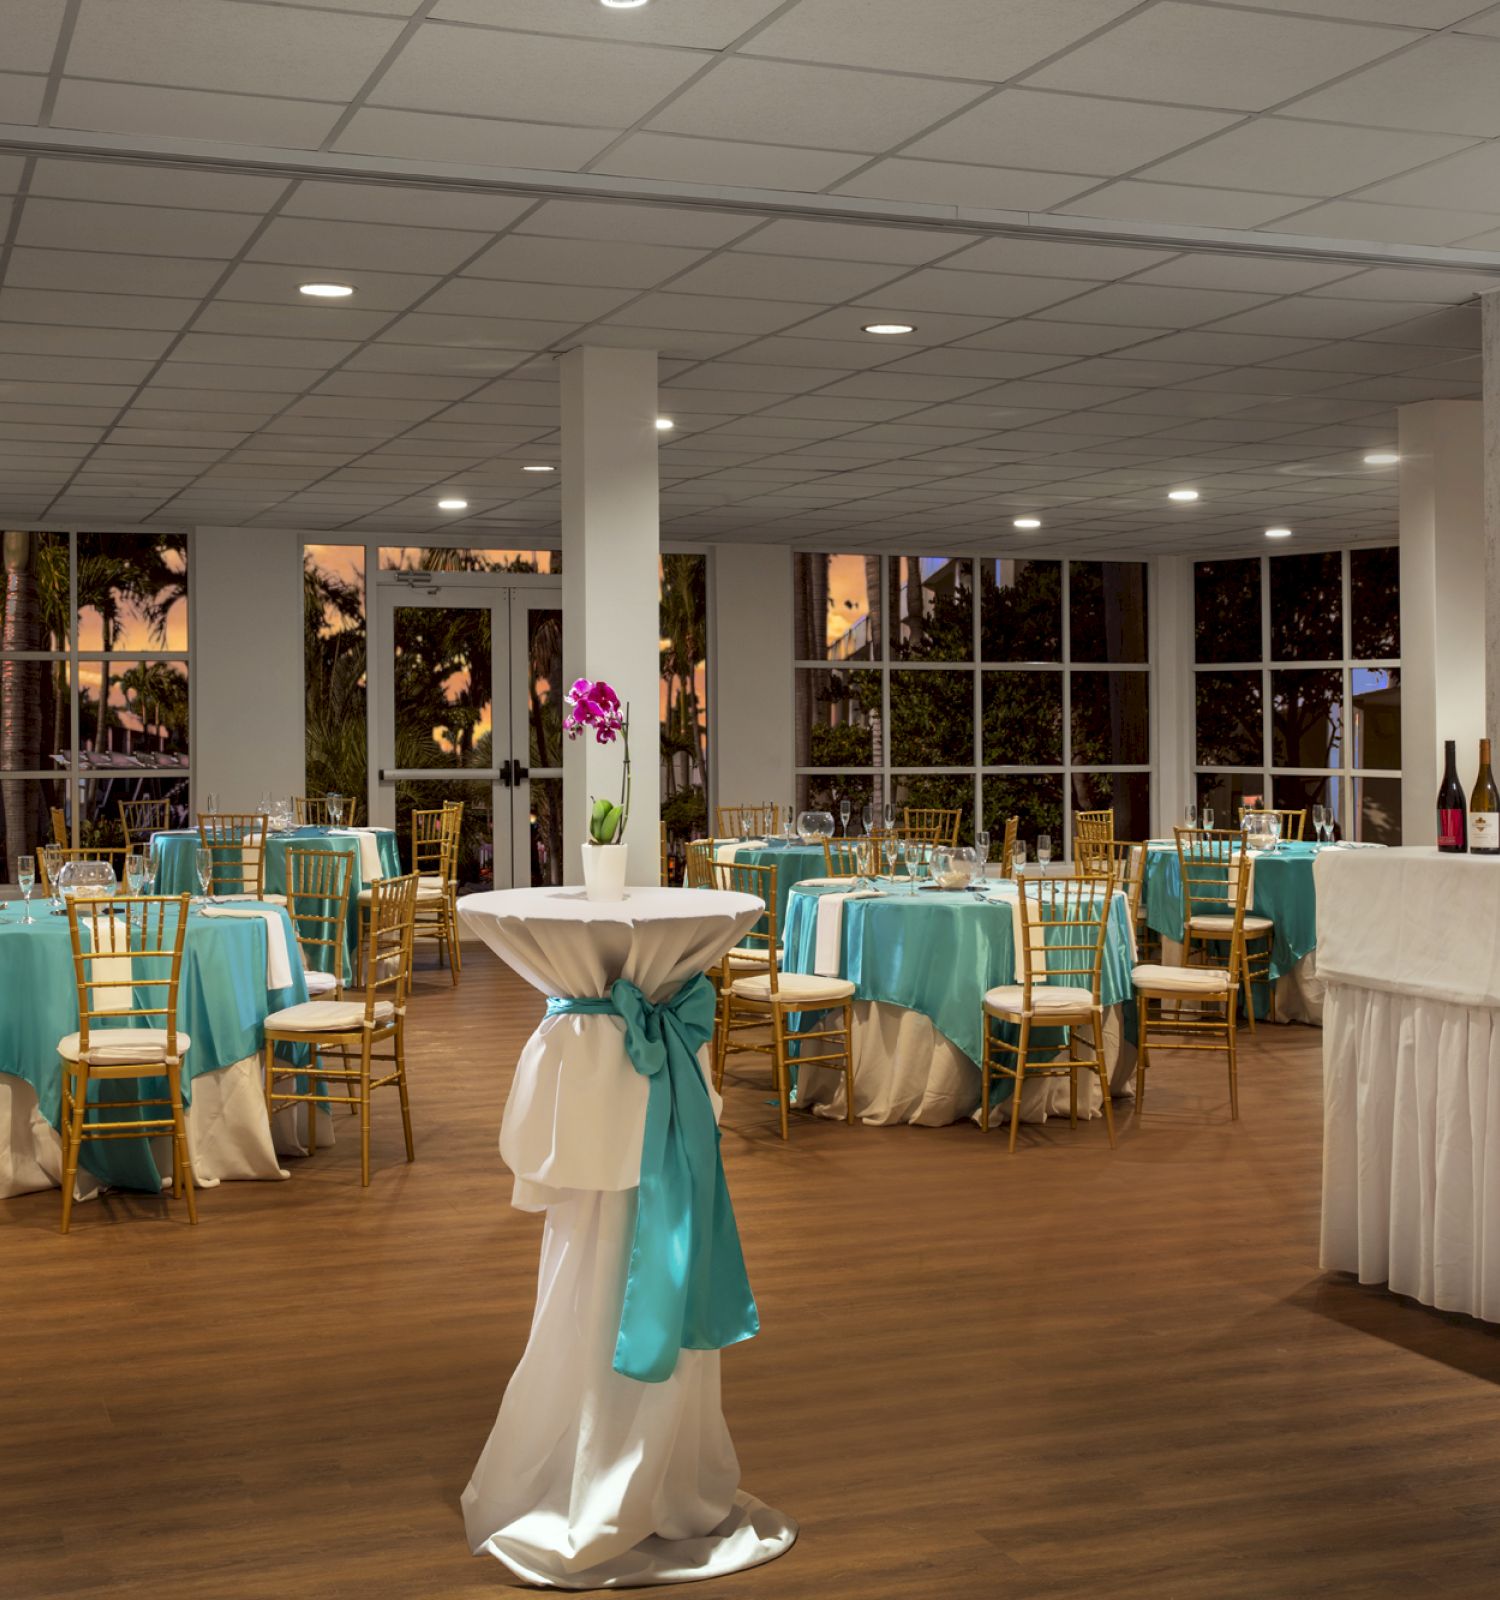 A decorated banquet hall with tables and chairs adorned in teal and white, high-top tables with flowers, and a bar area with bottles.